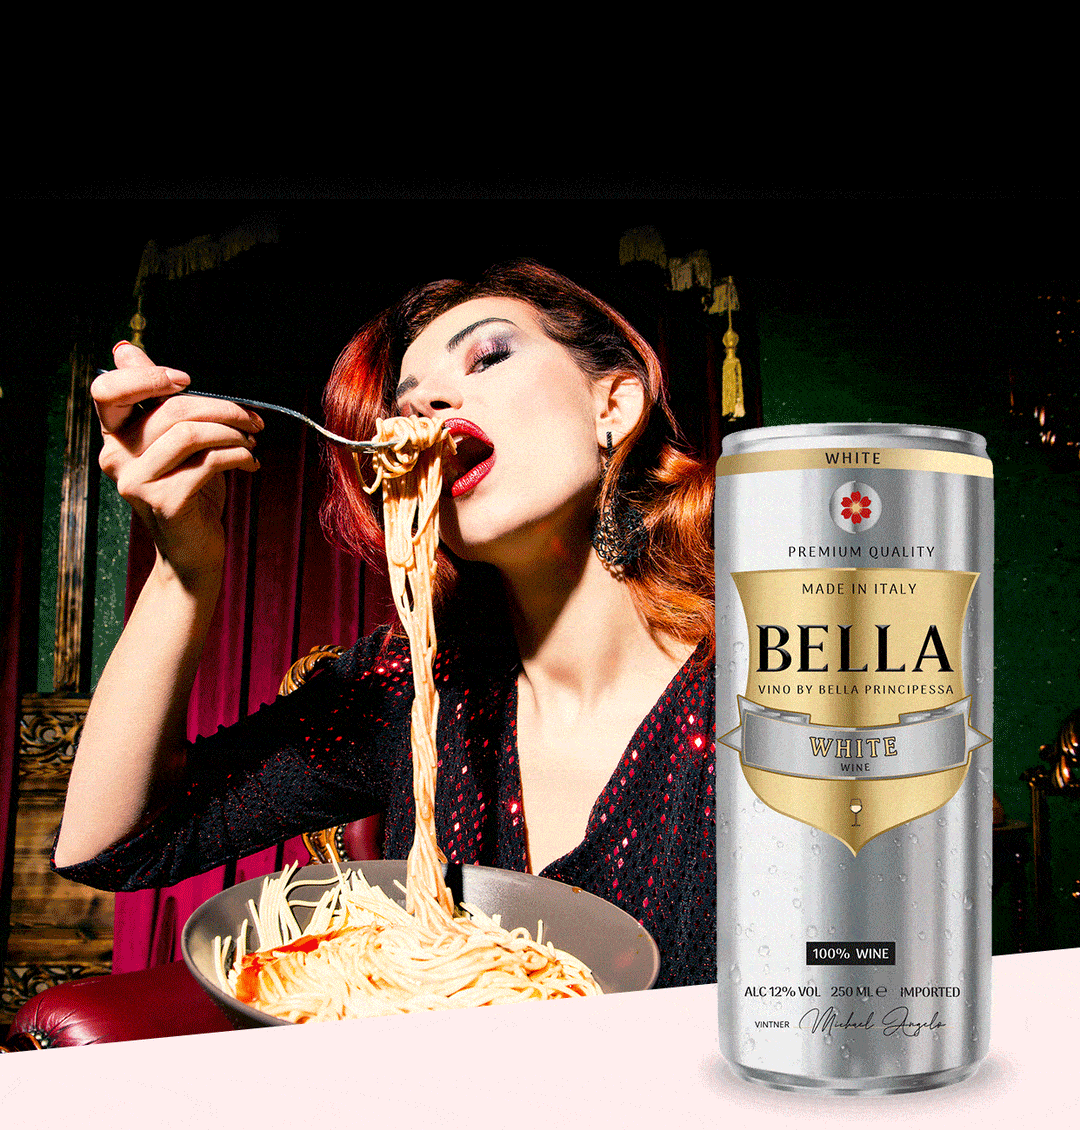 Bella Vino by Bella Principessa: Deliciously Refreshing Premium Wines and Cocktails in a Can.